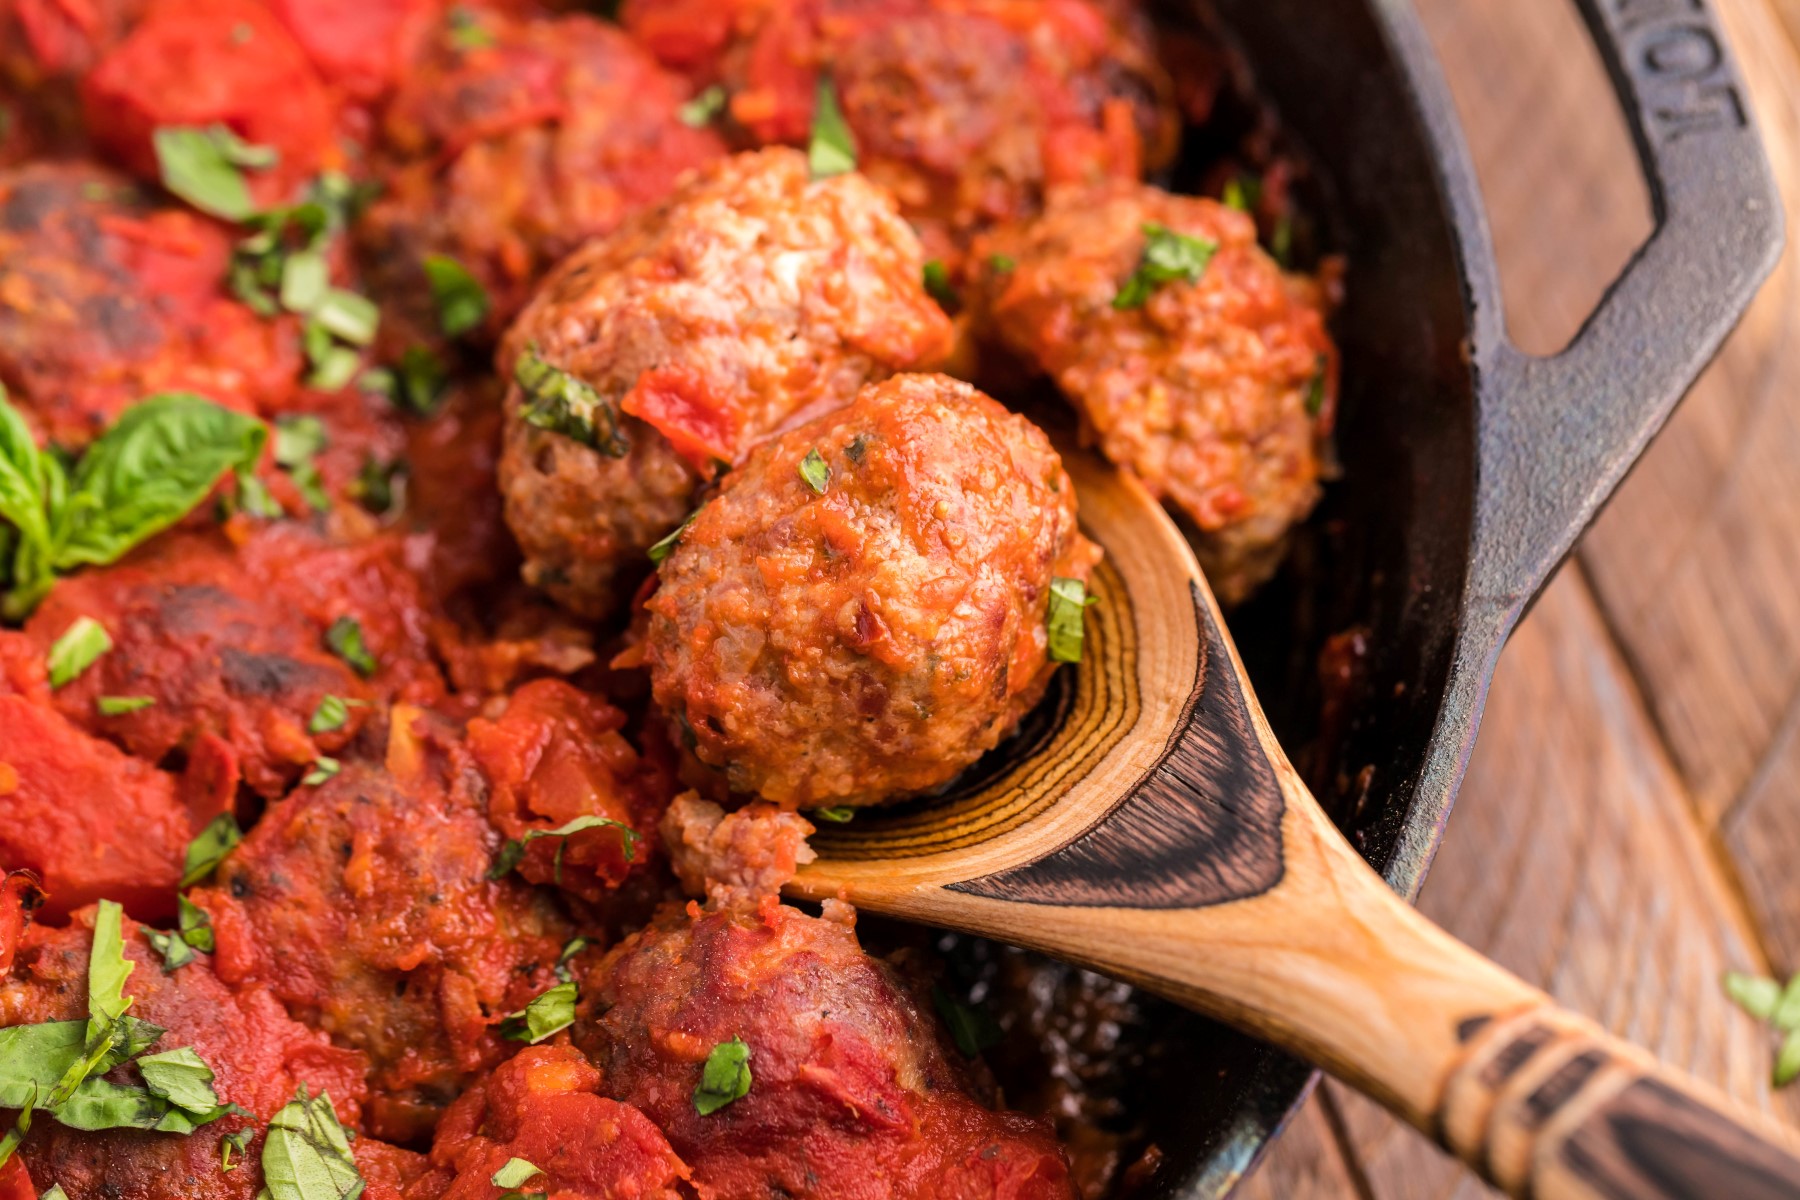 Scooping meatballs out of the cast iron skillet with a wooden spoon.